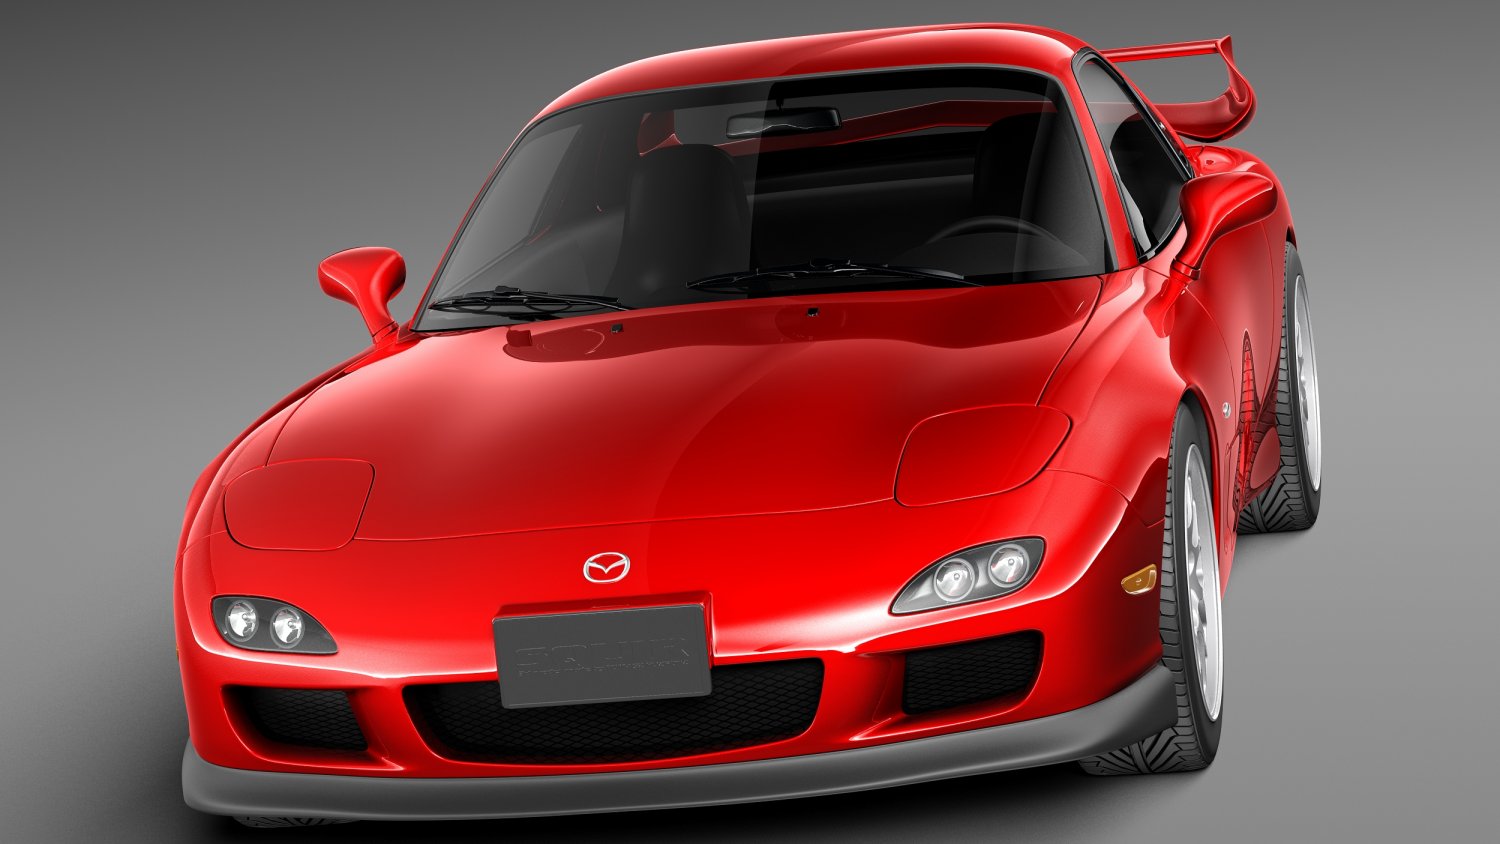 202 Mazda Rx 7 Images, Stock Photos, 3D objects, & Vectors